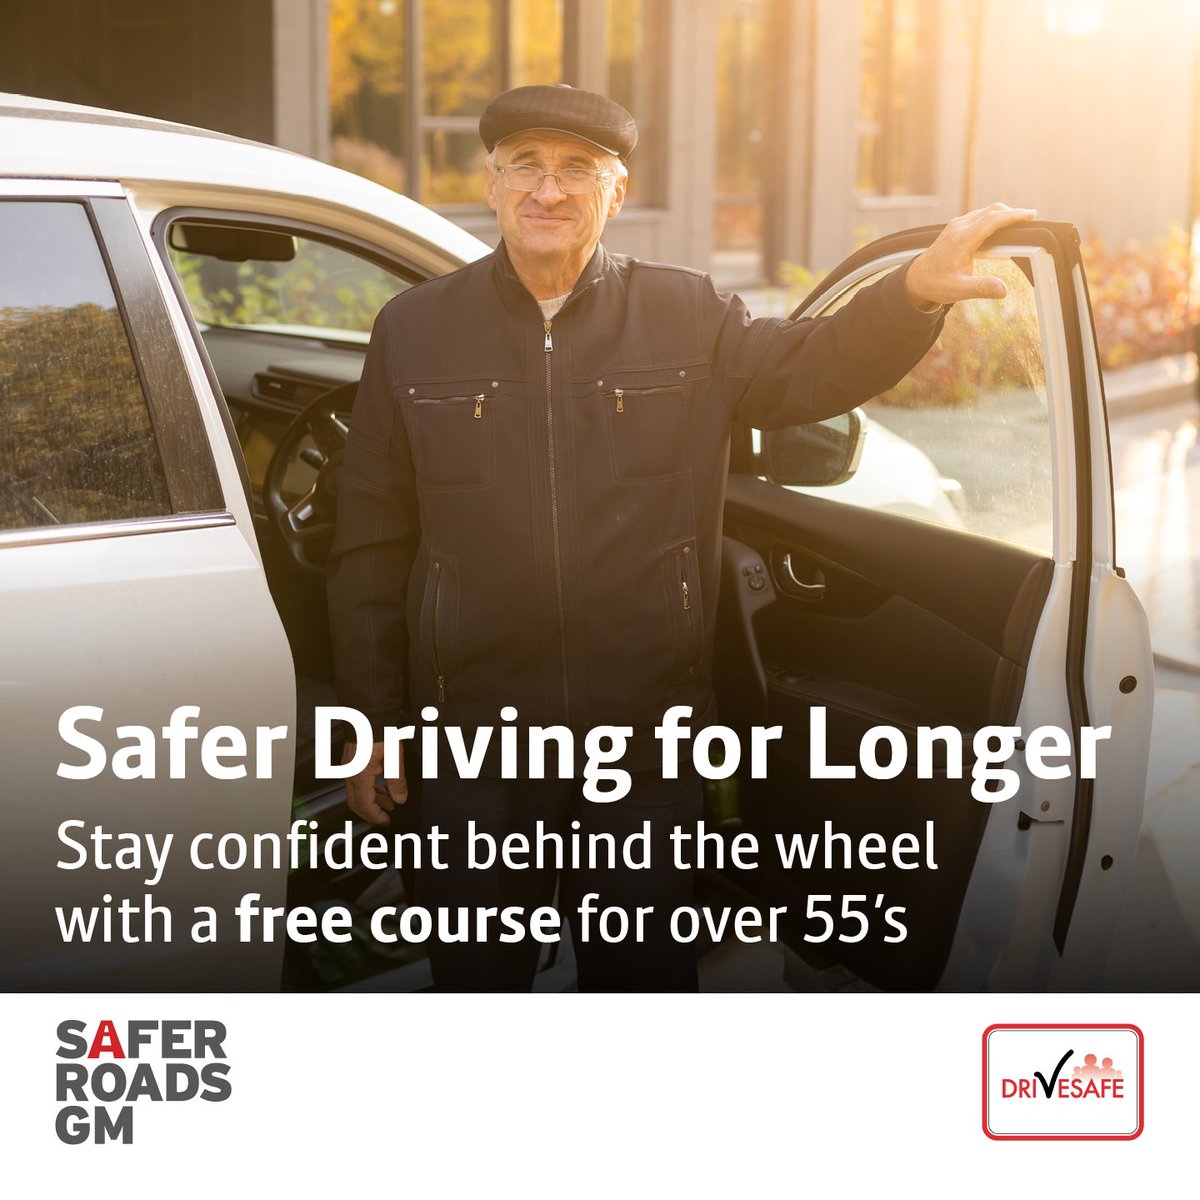 Sign up to one of our FREE Safer Driving for Longer courses if you want to: ✔️ Protect yourself on busy roads ✔️ Get the best efficiency from your car ✔️ Save on running costs Click here for more info and to sign up 👉 bit.ly/3QLGMhX